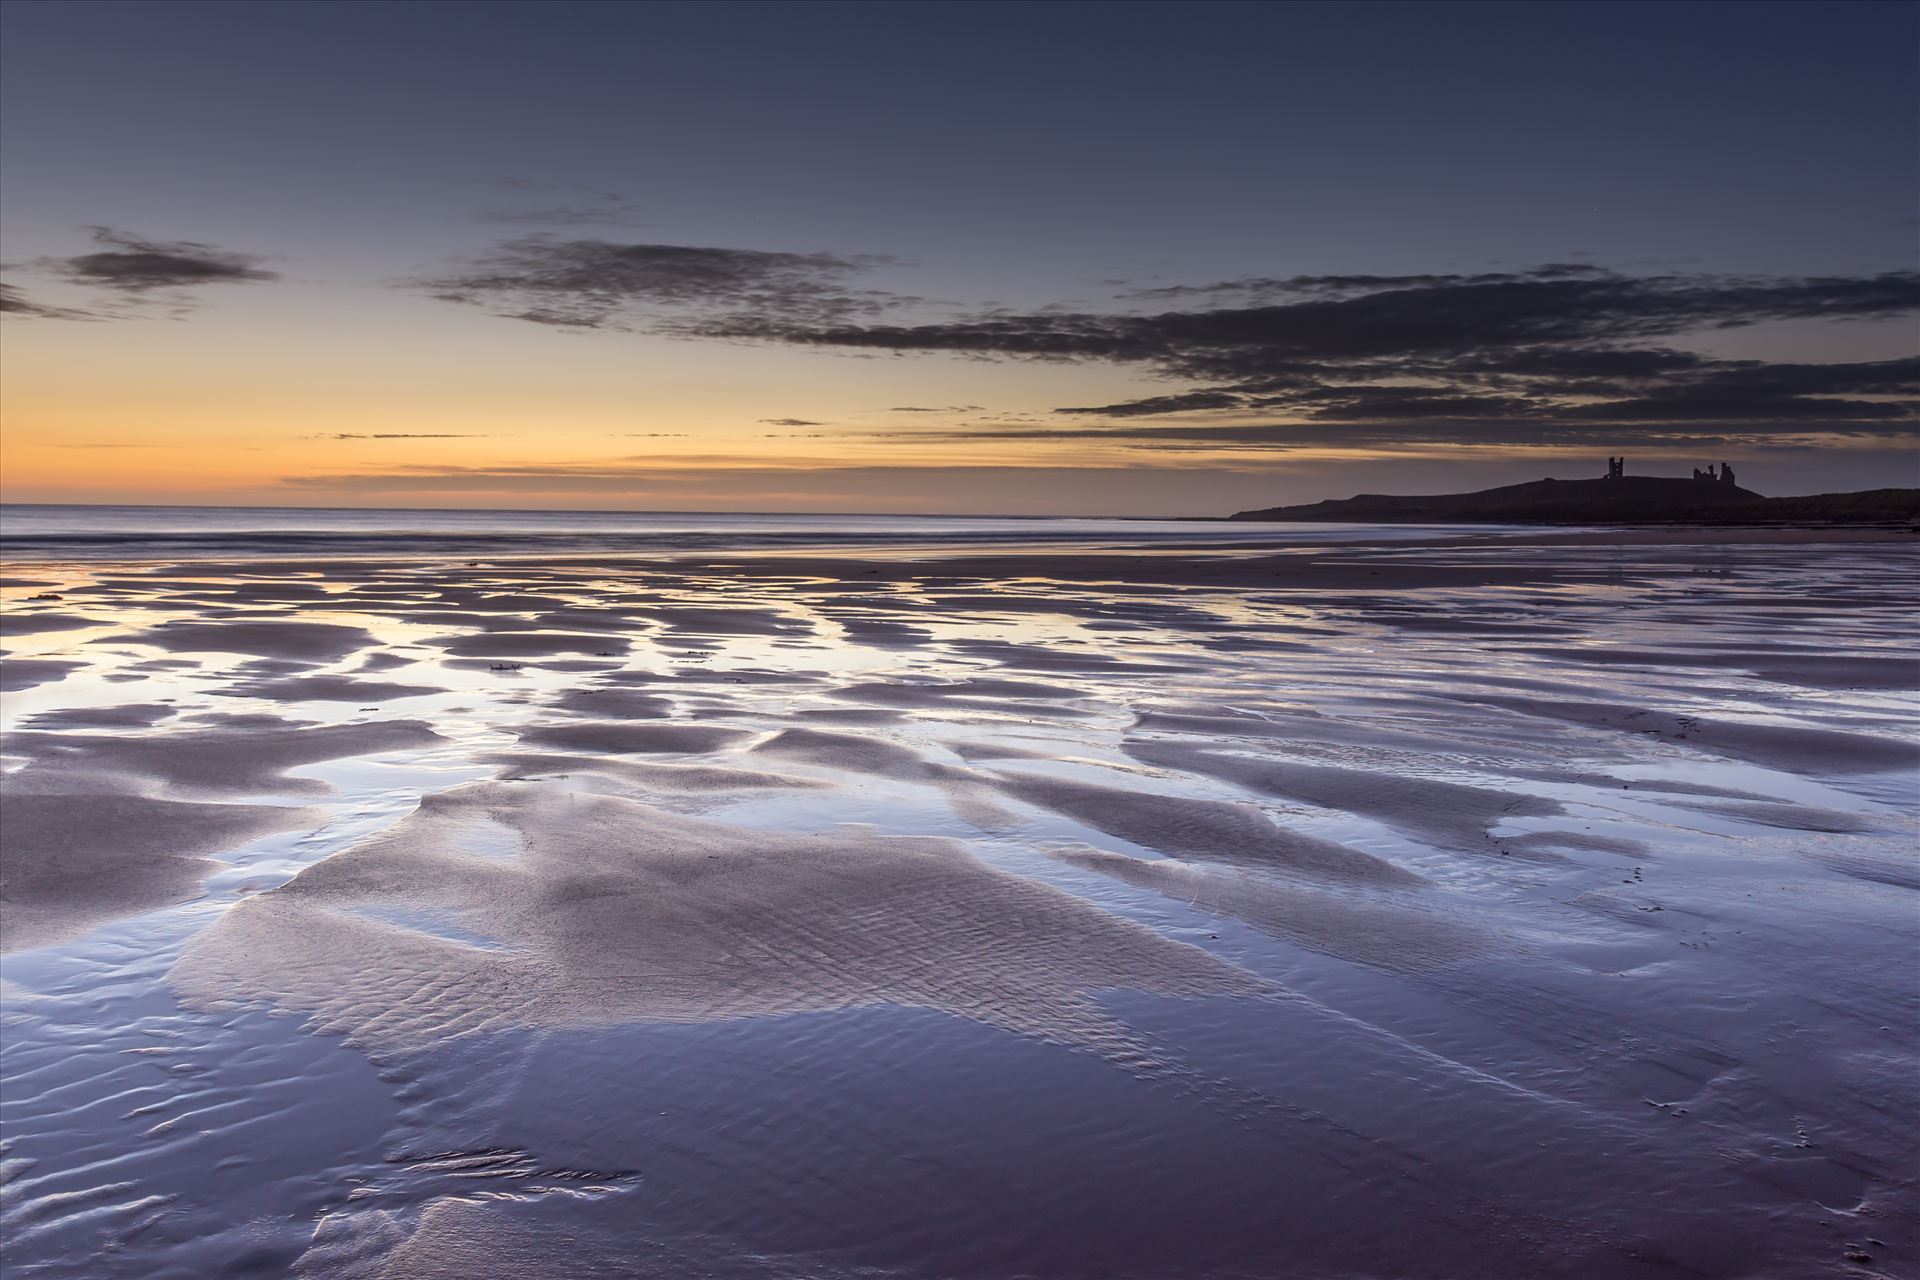 Sunrise at Embleton Bay, Northumberland - Embleton Bay is a bay on the North Sea, located to the east of the village of Embleton, Northumberland, England. It lies just to the south of Newton-by-the-Sea and north of Craster by philreay